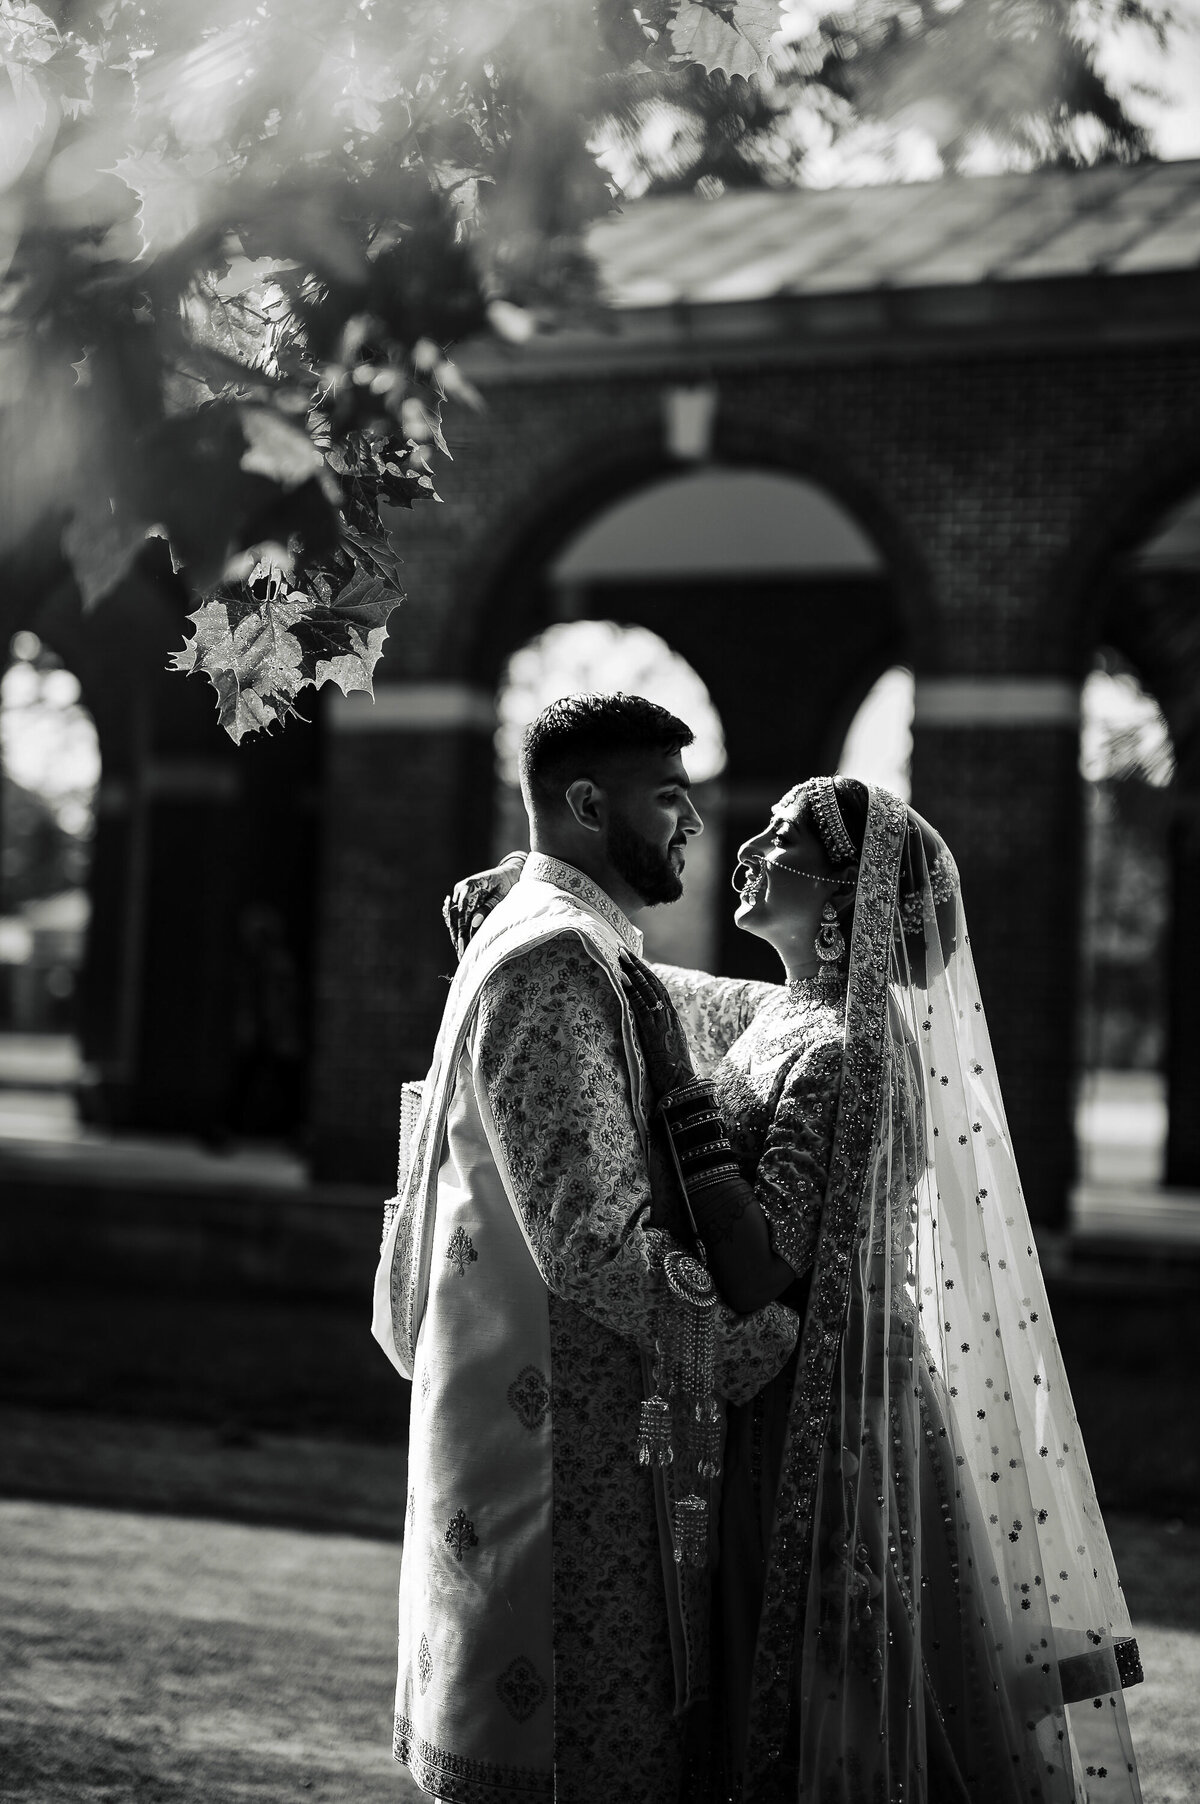 Candid Wedding Photographers NJ: Ishan Fotografi: Authentic NJ wedding moments. Candid photos that capture the real joy of your day.